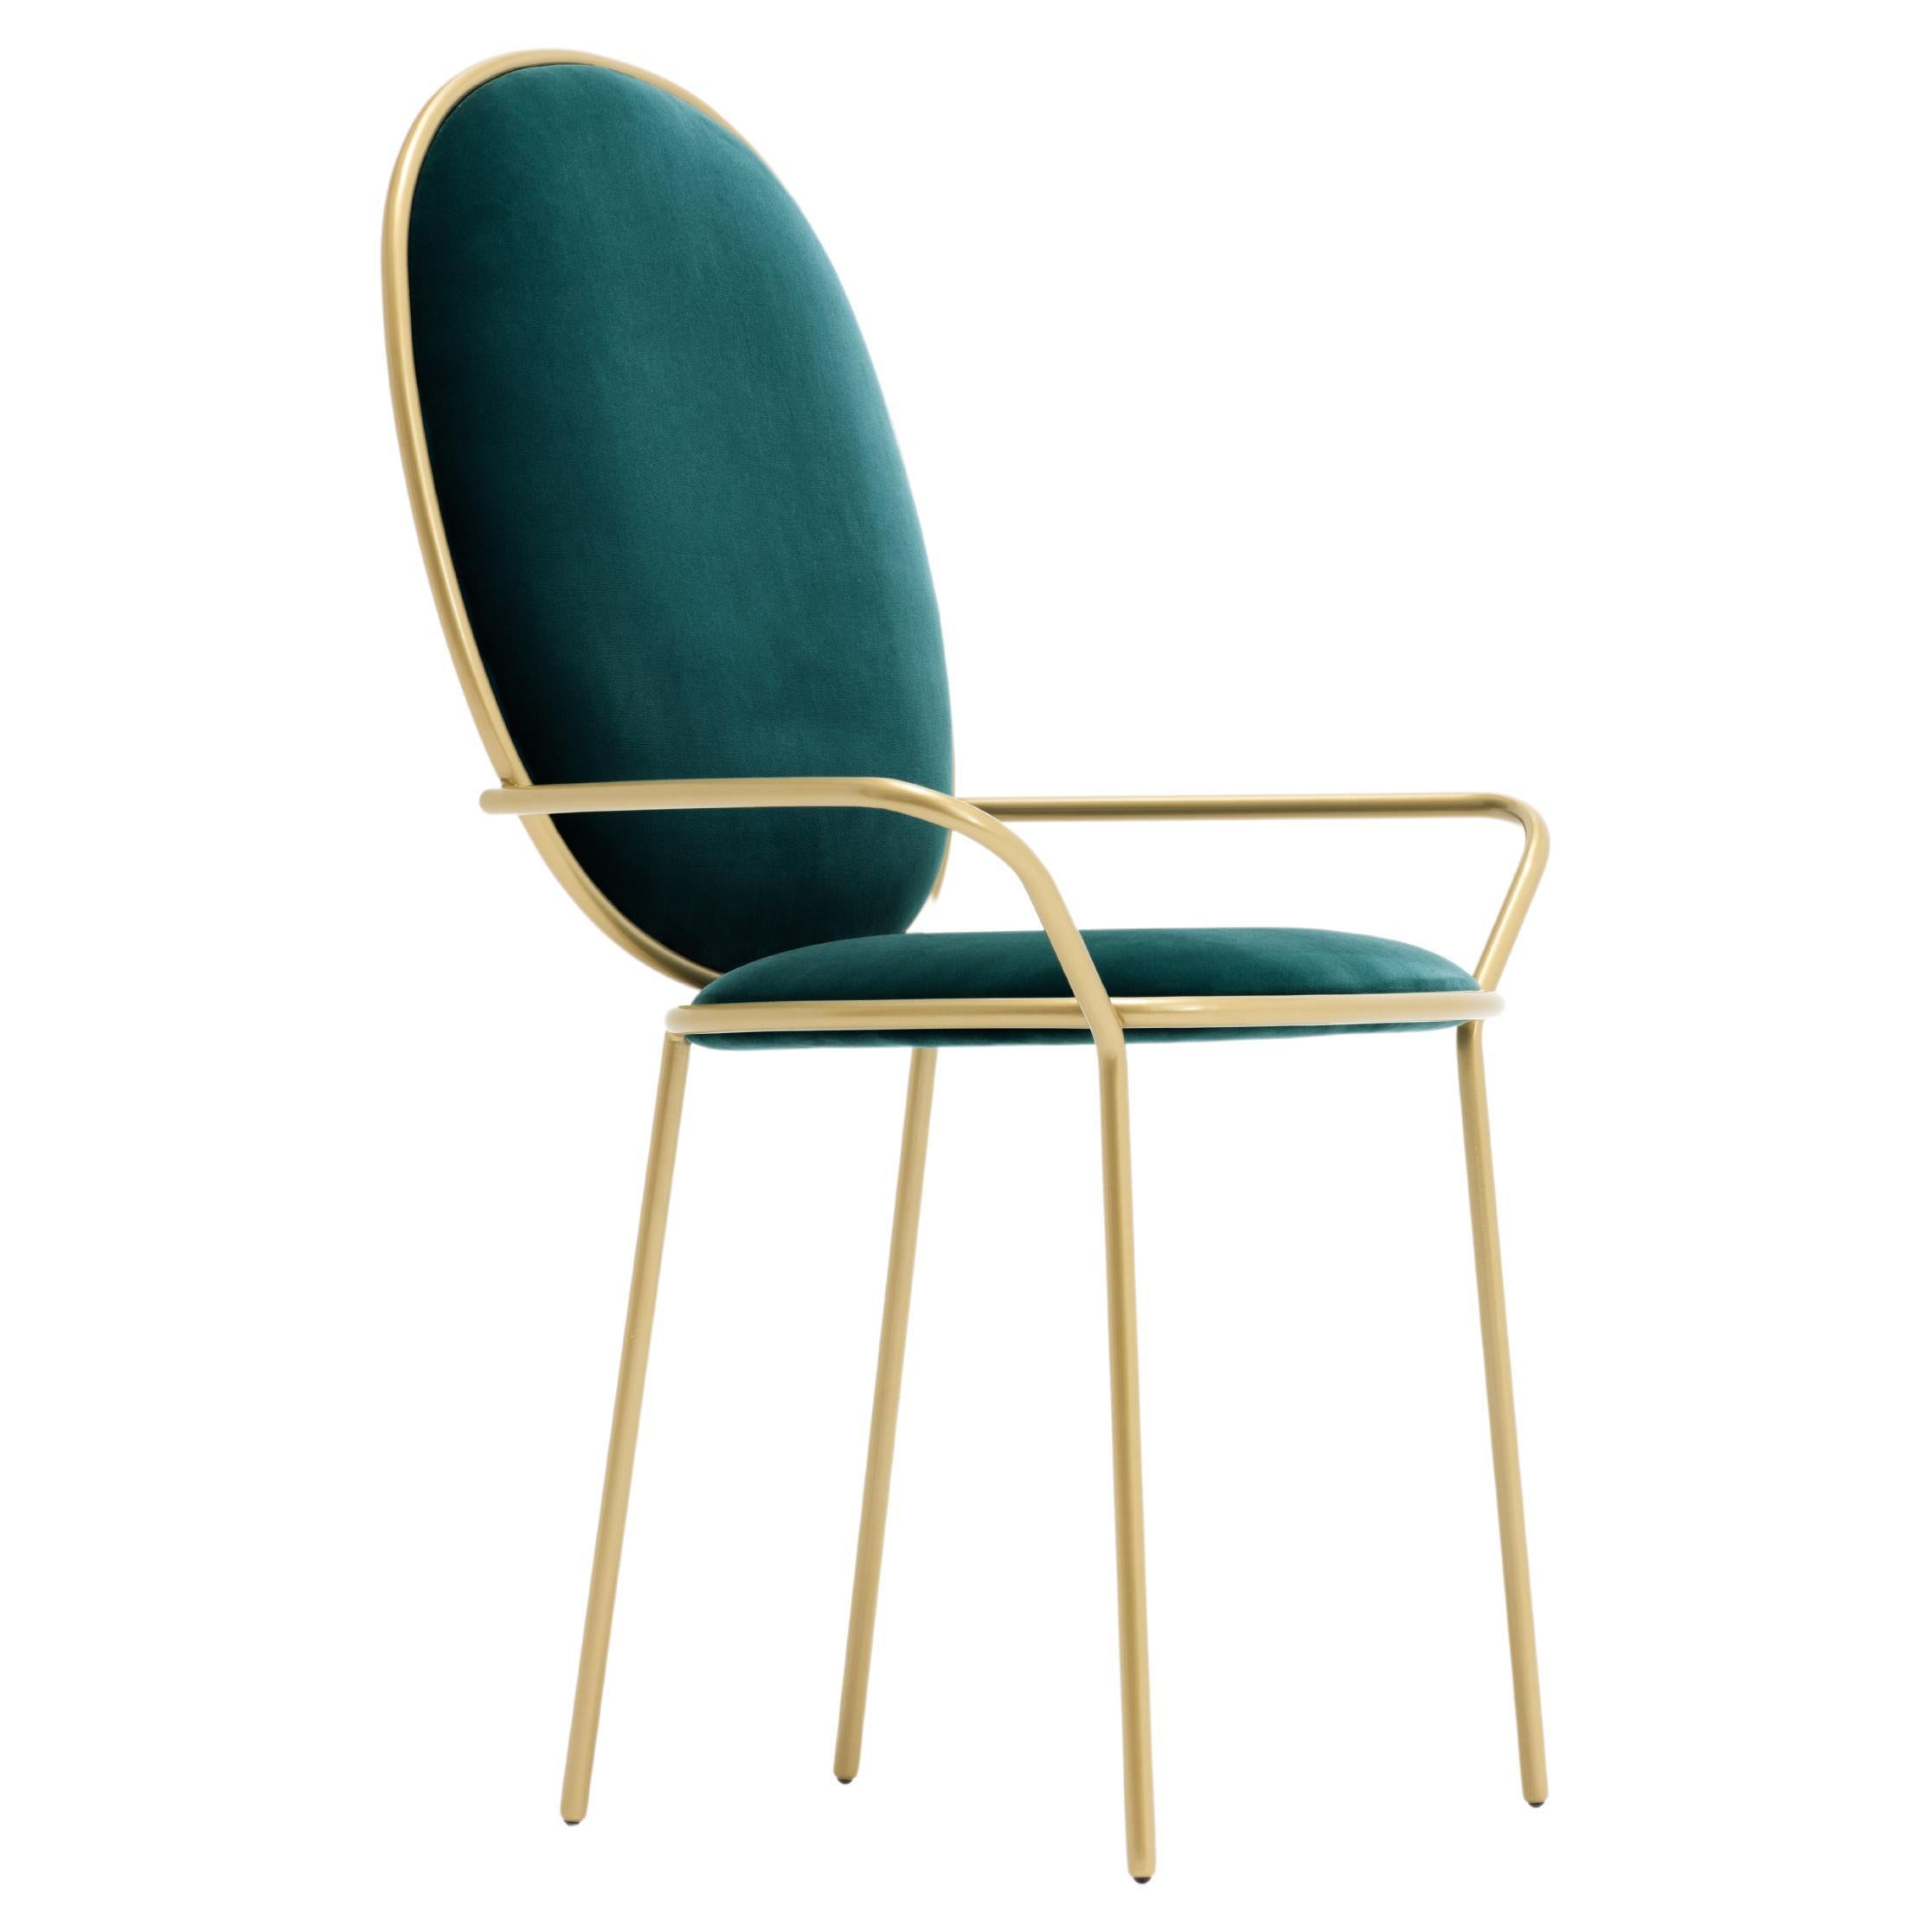 Contemporary Ocean Green Velvet Upholstered Dining Armchair, Stay by Nika Zupanc